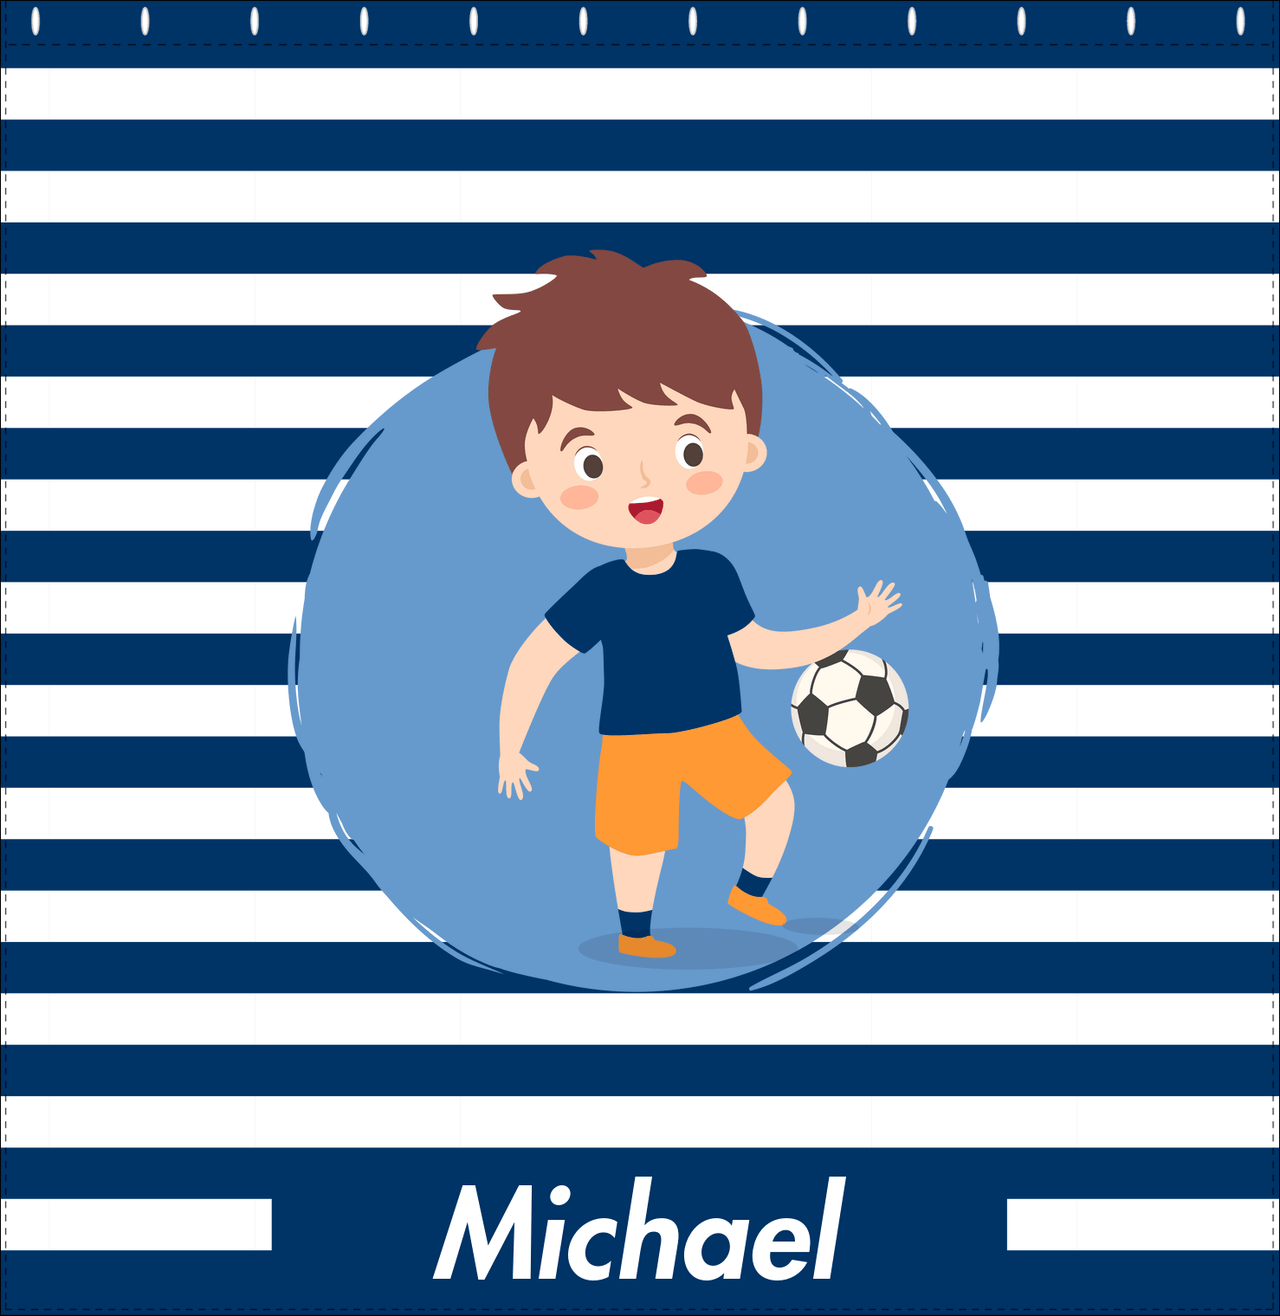 Personalized Soccer Shower Curtain XXIV - Blue Background - Brown Hair Boy I - Decorate View